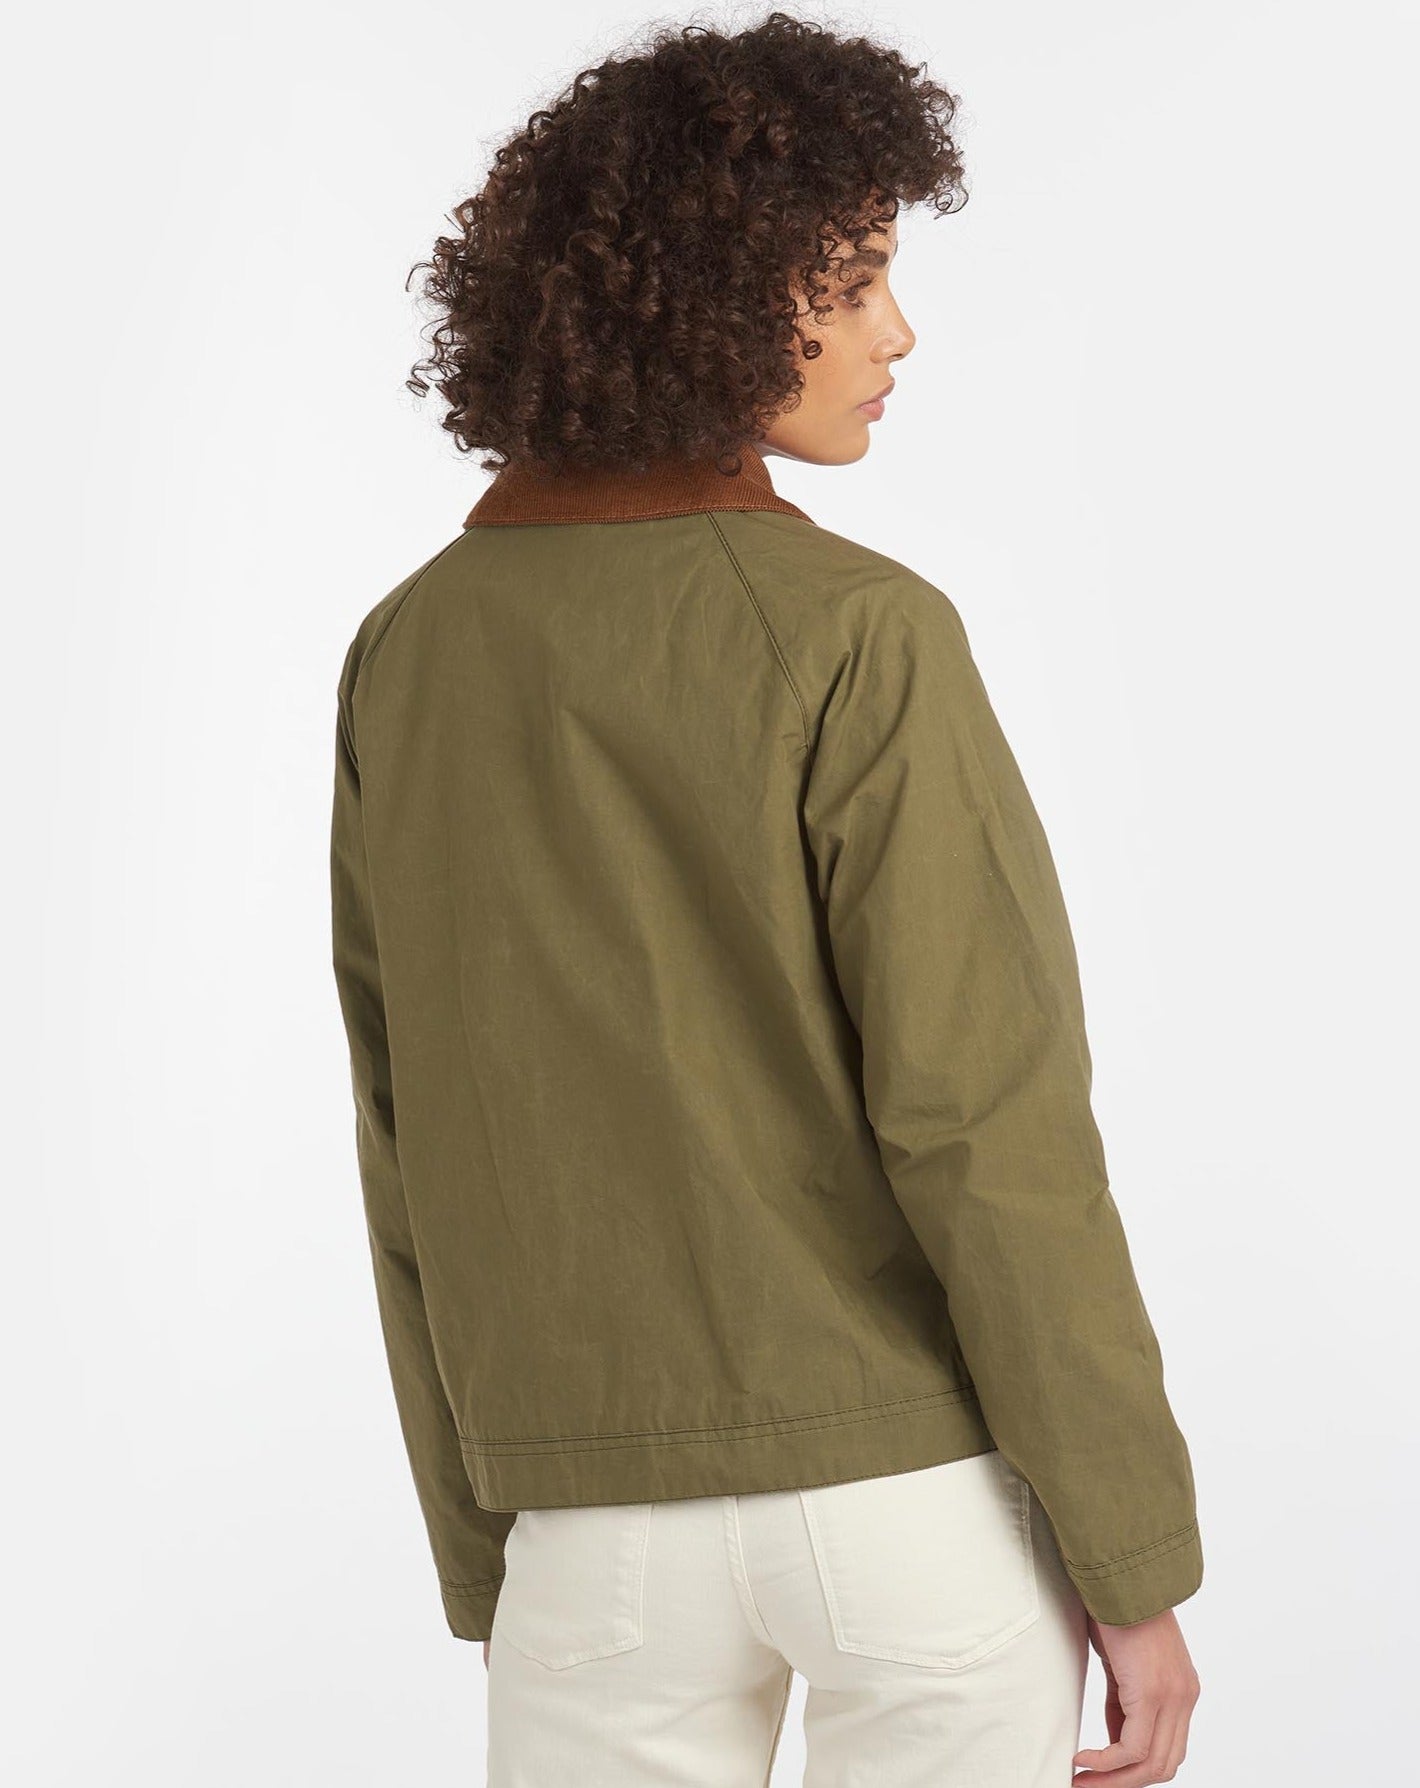 Barbour Jacket Woman Campbell Showerproof Olive Classic